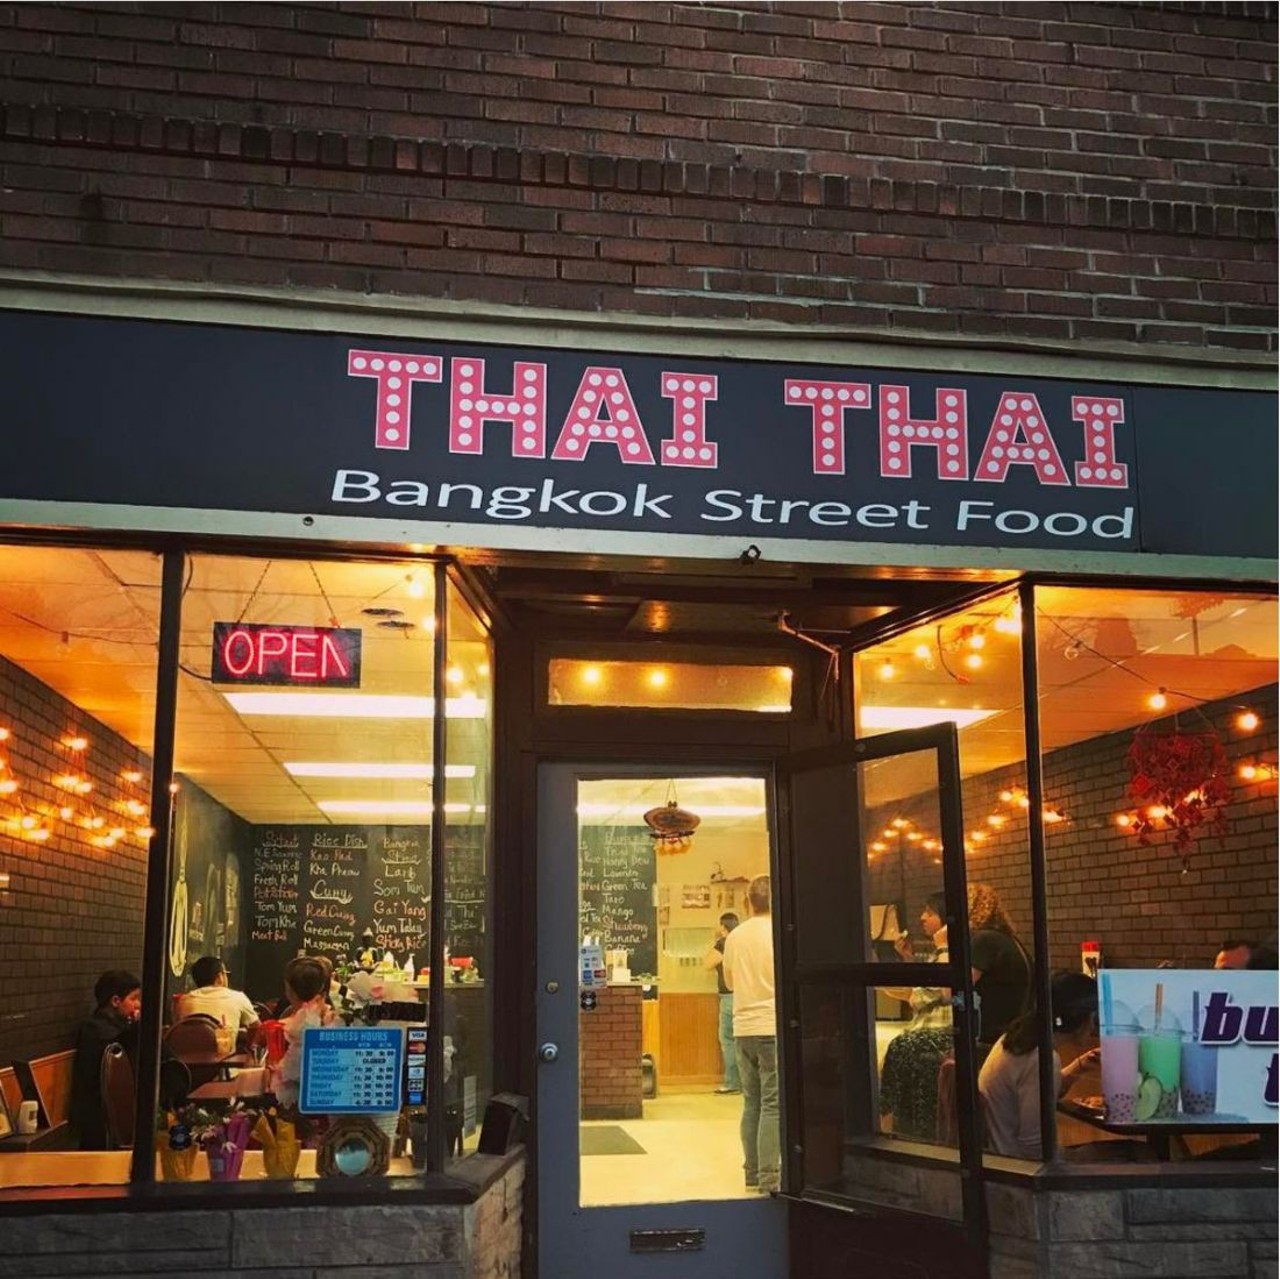  Thai Thai
13735 Madison Ave., 216-961-9655
If you truly want to eat spicy Thai food at restaurants, you often have to ask for the "Thai spicy" preparation that doesn't come on the menu. Thankfully, the folks at Thai Thai have eliminated that need and just serve the heat. Order the som tum or pad krapow if you're looking for a truly "Thai spicy" dish.
Photo via thaithailakewood/Instagram